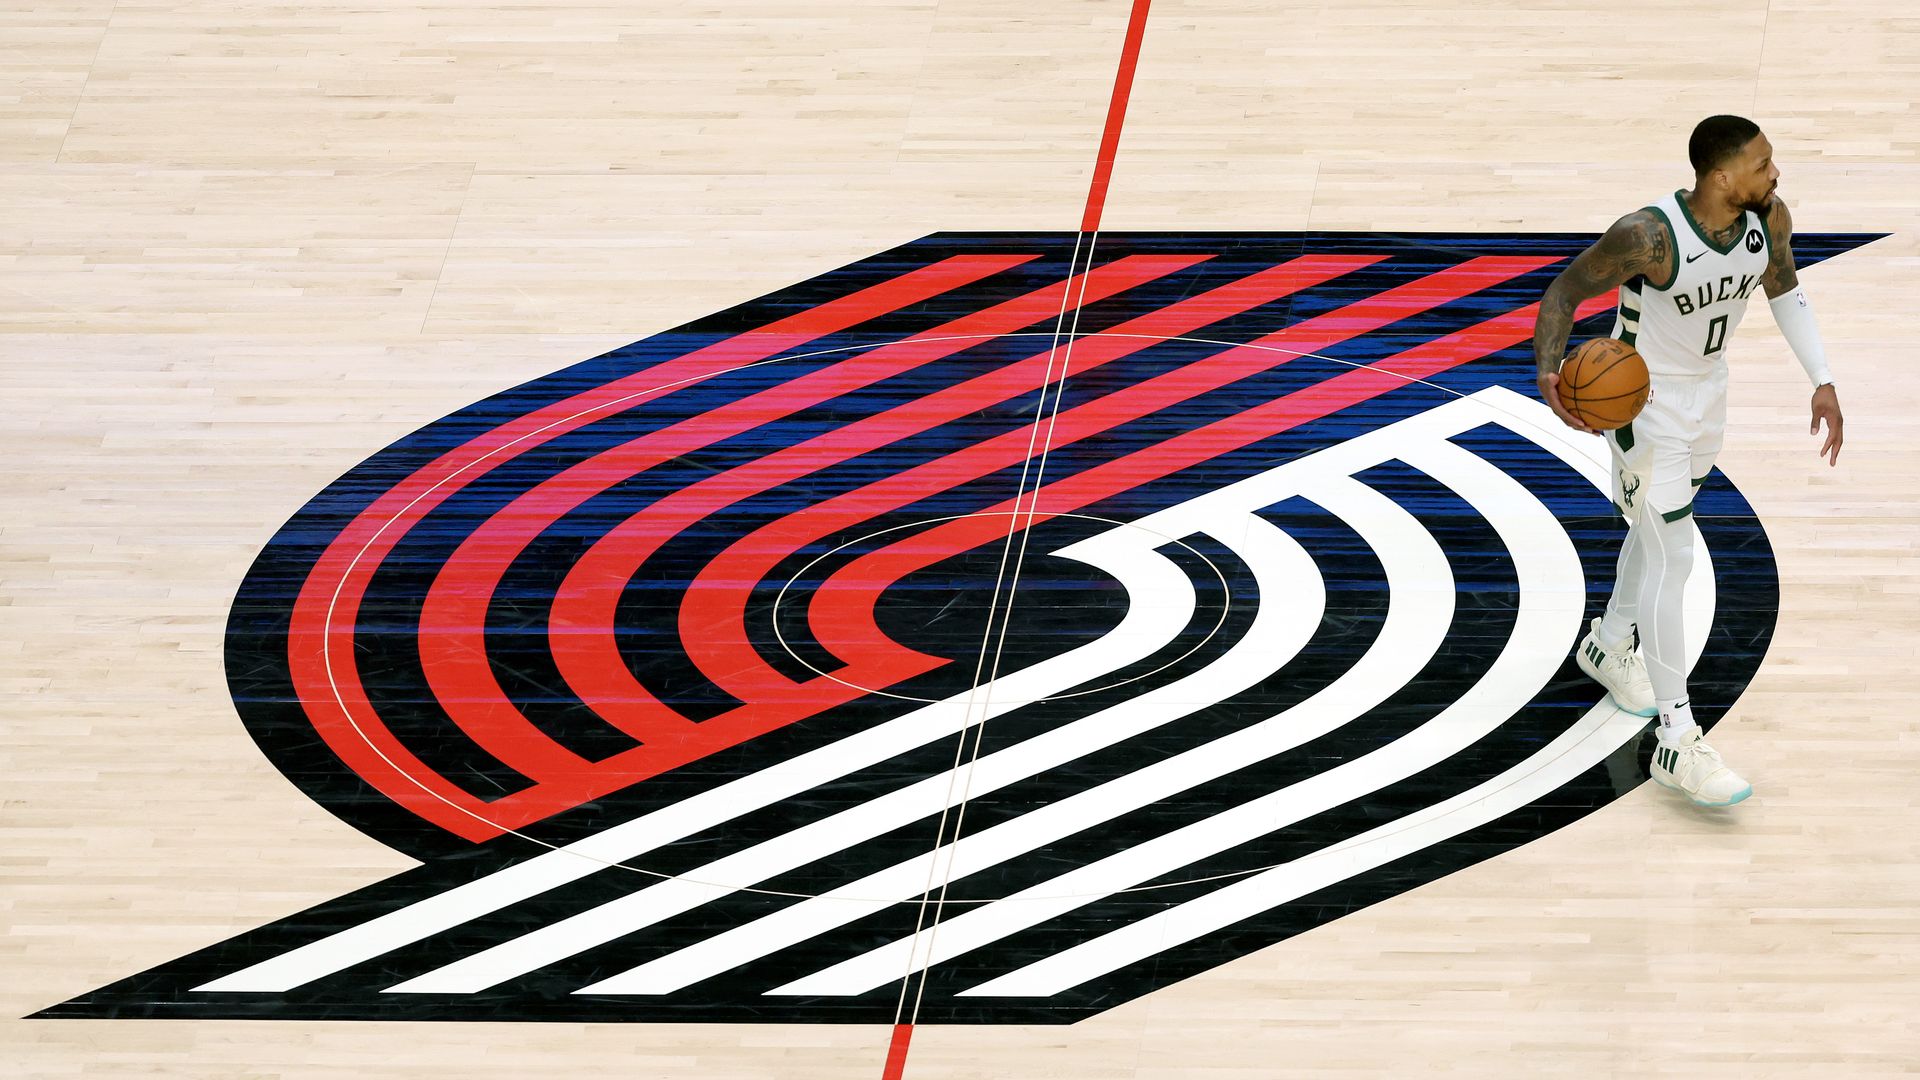 A photo of a person walking and dribbling a basketball next to a Portland Trail Blazers logo.